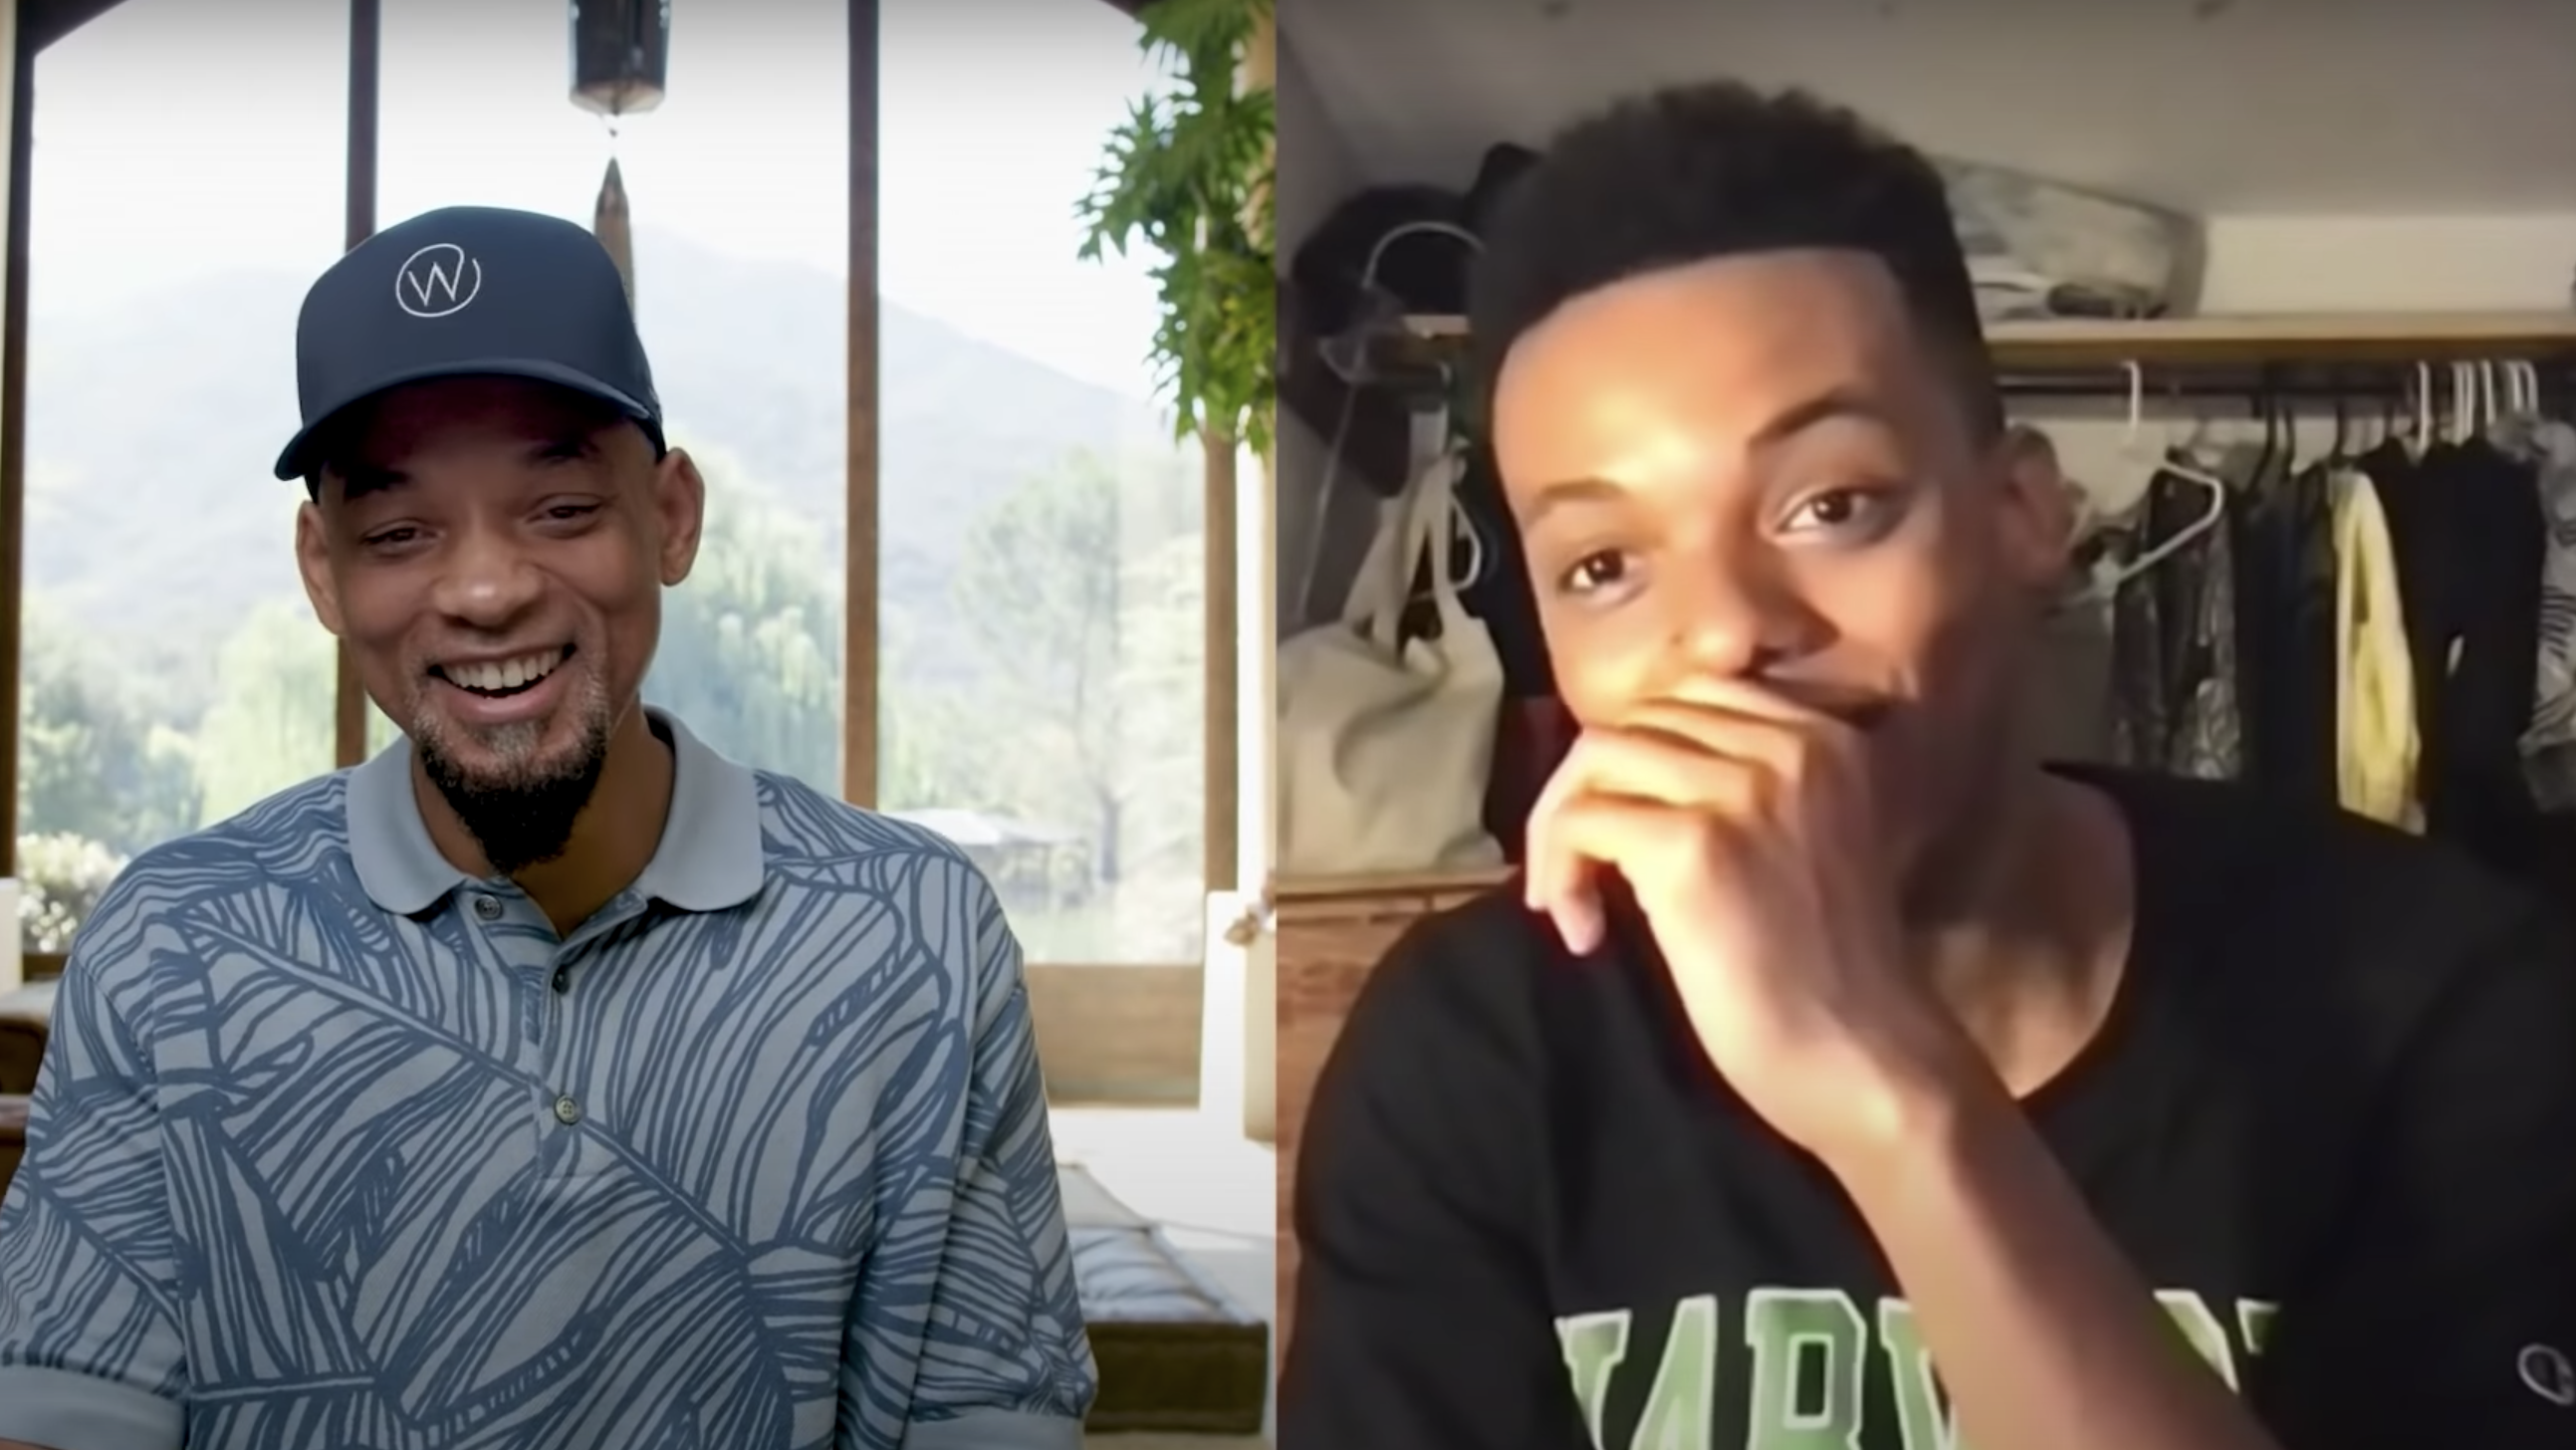 Will Smith passes the title of “Fresh Prince of Bel-Air” to star of Peacock’s dramatic reboot, Jabari Banks